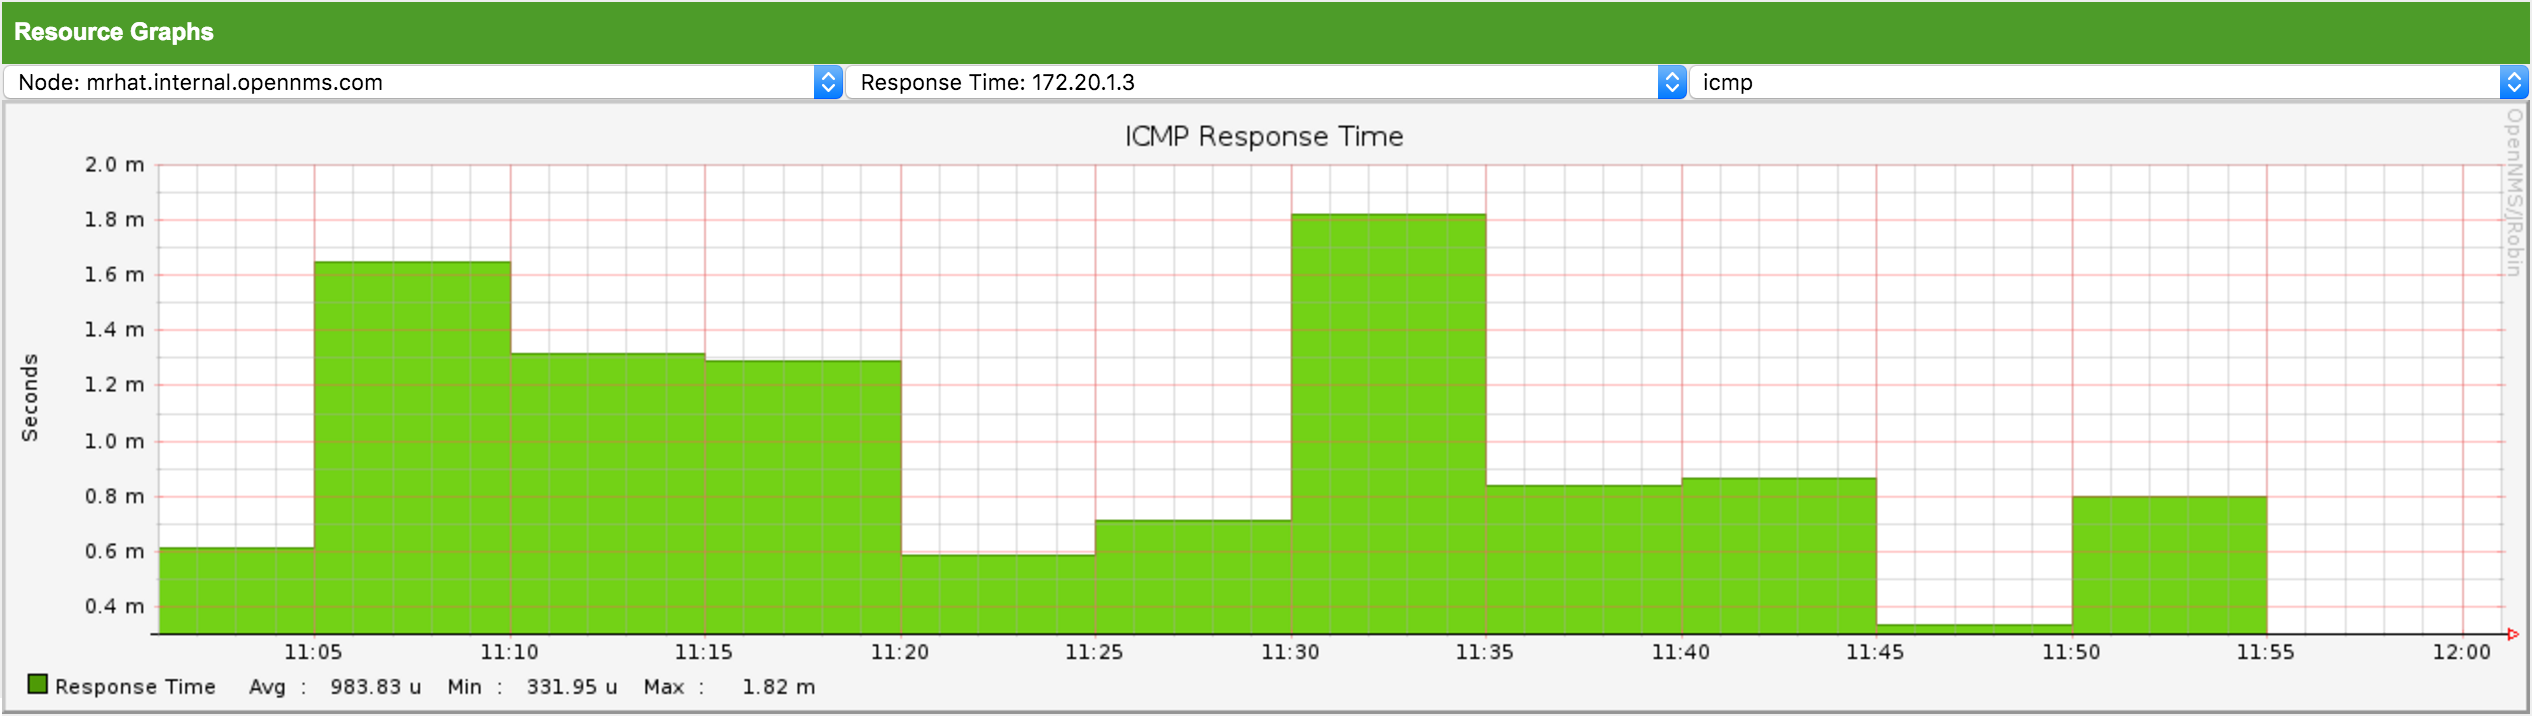 Meridian UI displaying a resource graphs component, showing ICMP response time data from 11:00 a.m. to 12:00 p.m.